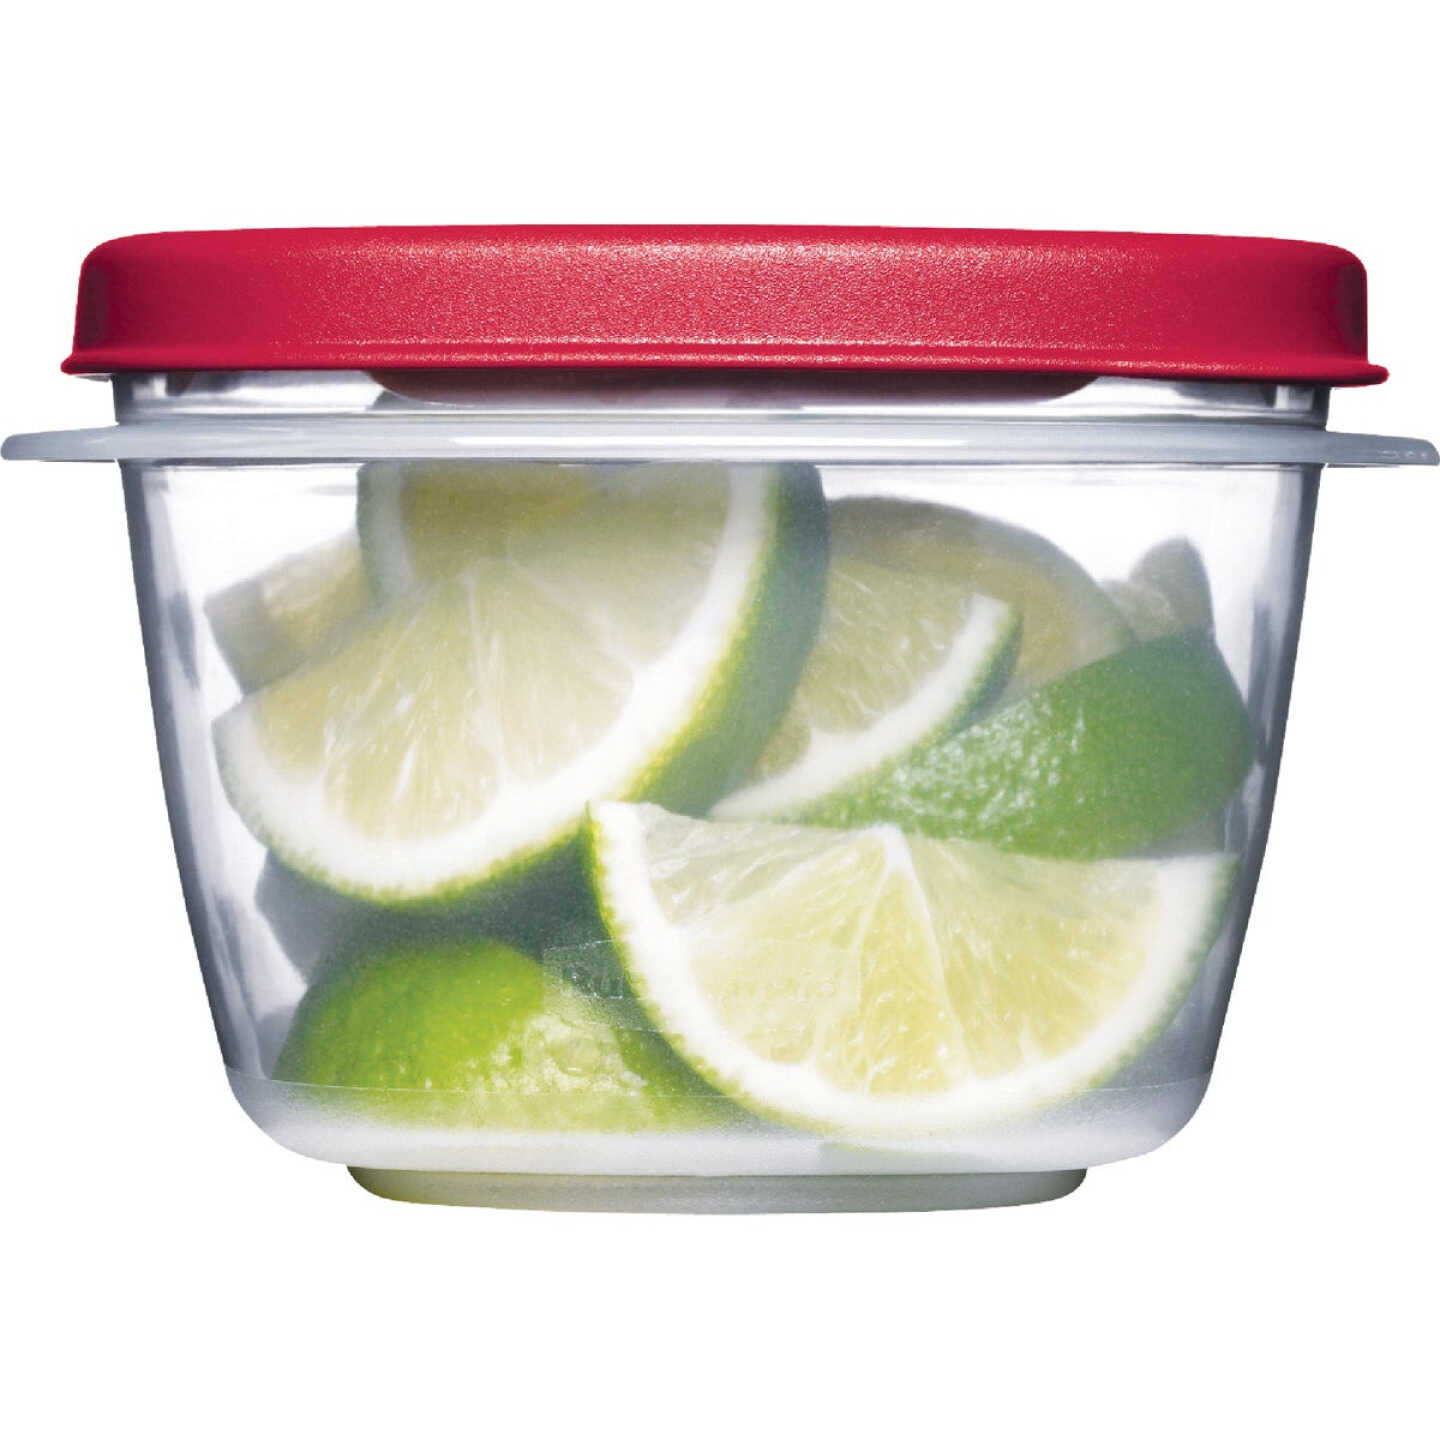 Rubbermaid Easy Find Lids 1.5 Gal. Clear Rectangle Food Storage